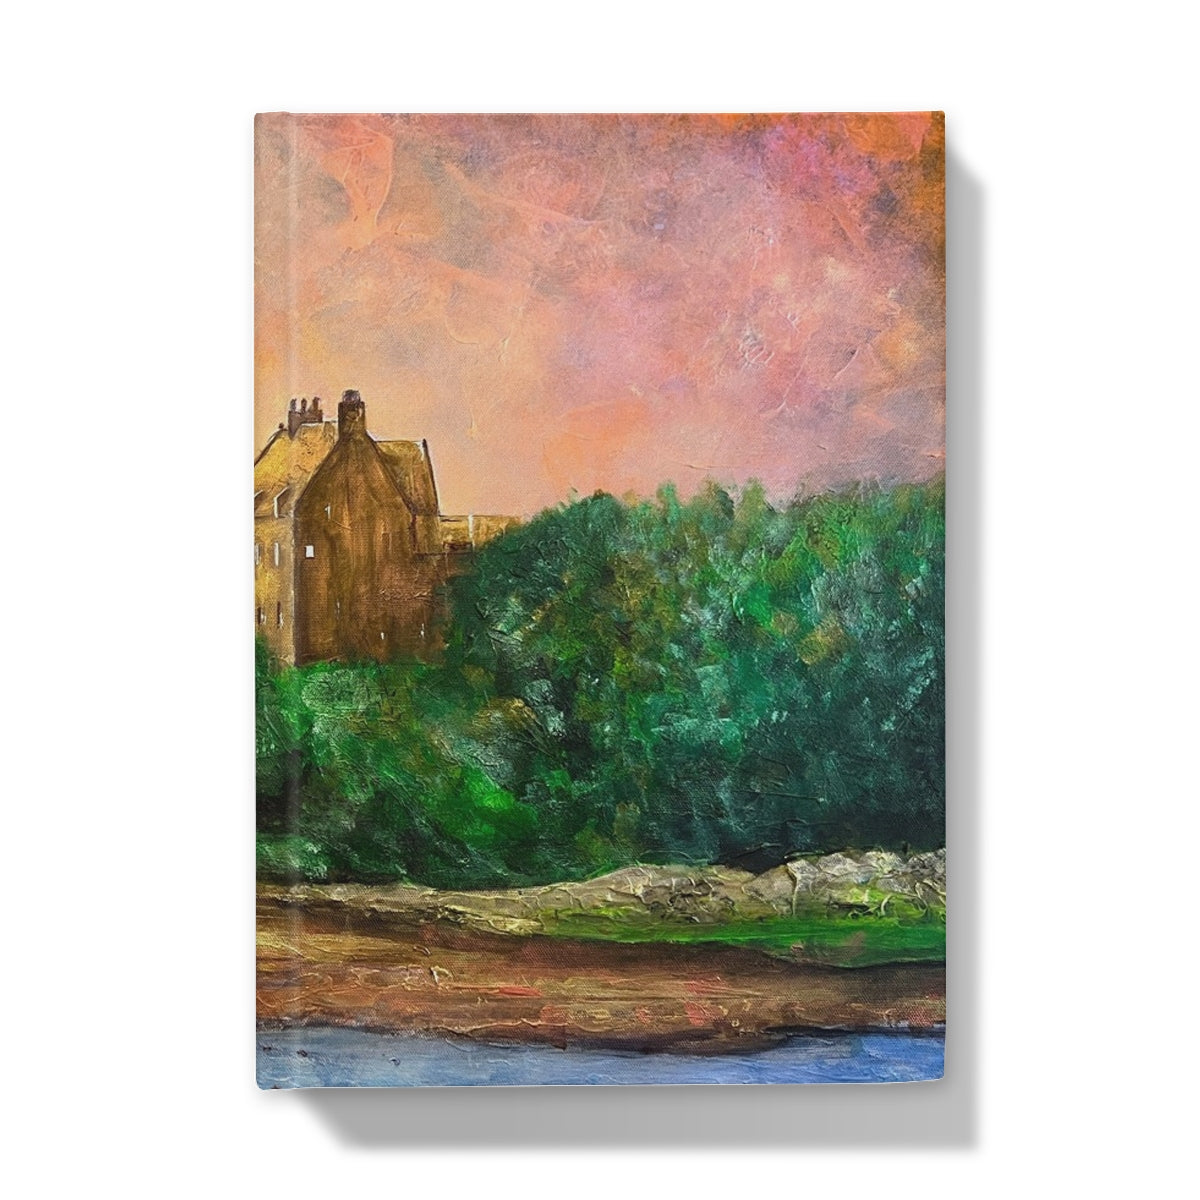 Duntrune Castle Art Gifts Hardback Journal-Journals & Notebooks-Historic & Iconic Scotland Art Gallery-A4-Lined-Paintings, Prints, Homeware, Art Gifts From Scotland By Scottish Artist Kevin Hunter